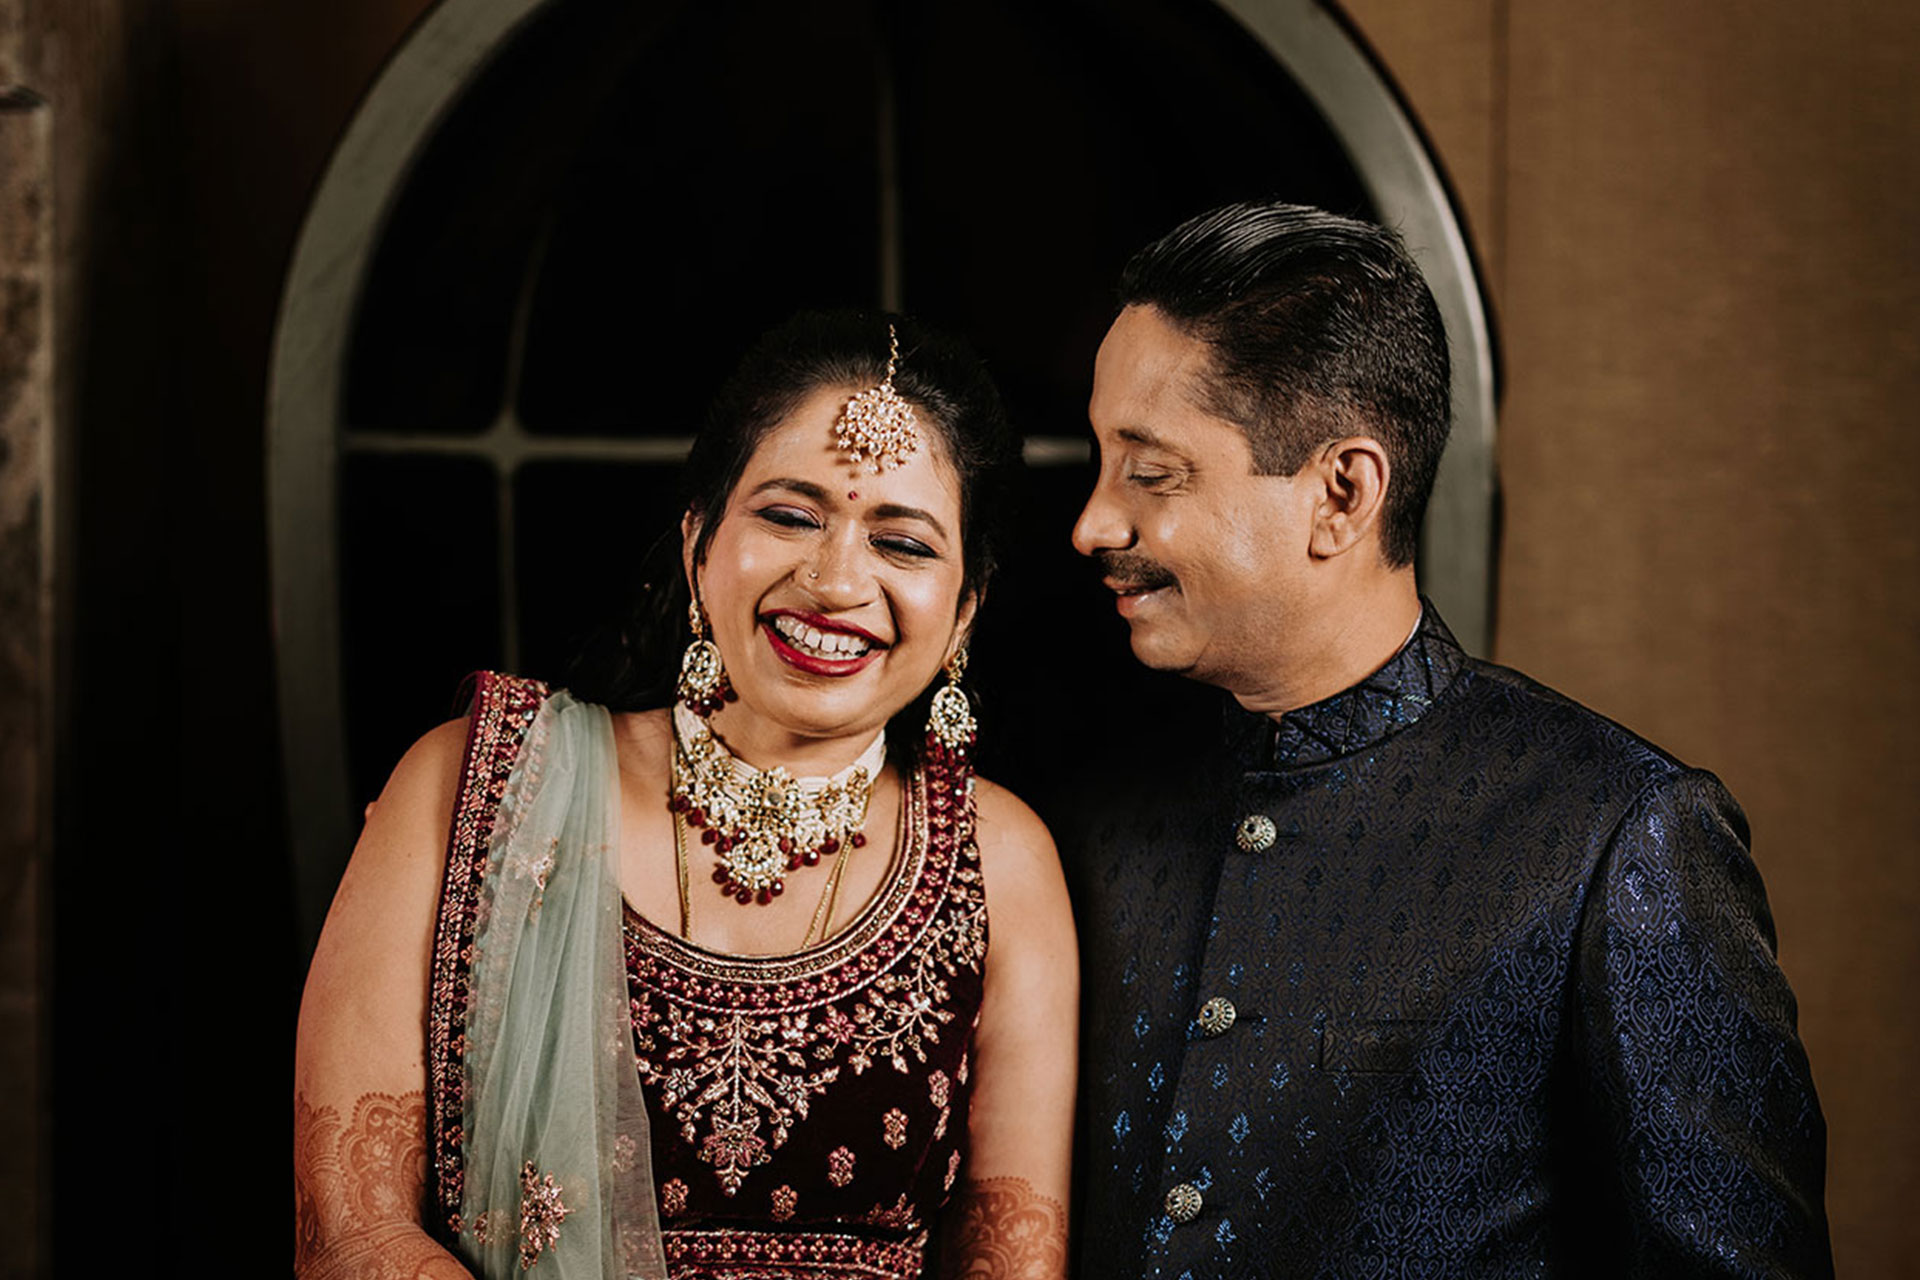 This Delhi couple cancelled their big destination wedding to get married at  home, during the coronavirus pandemic | Vogue India